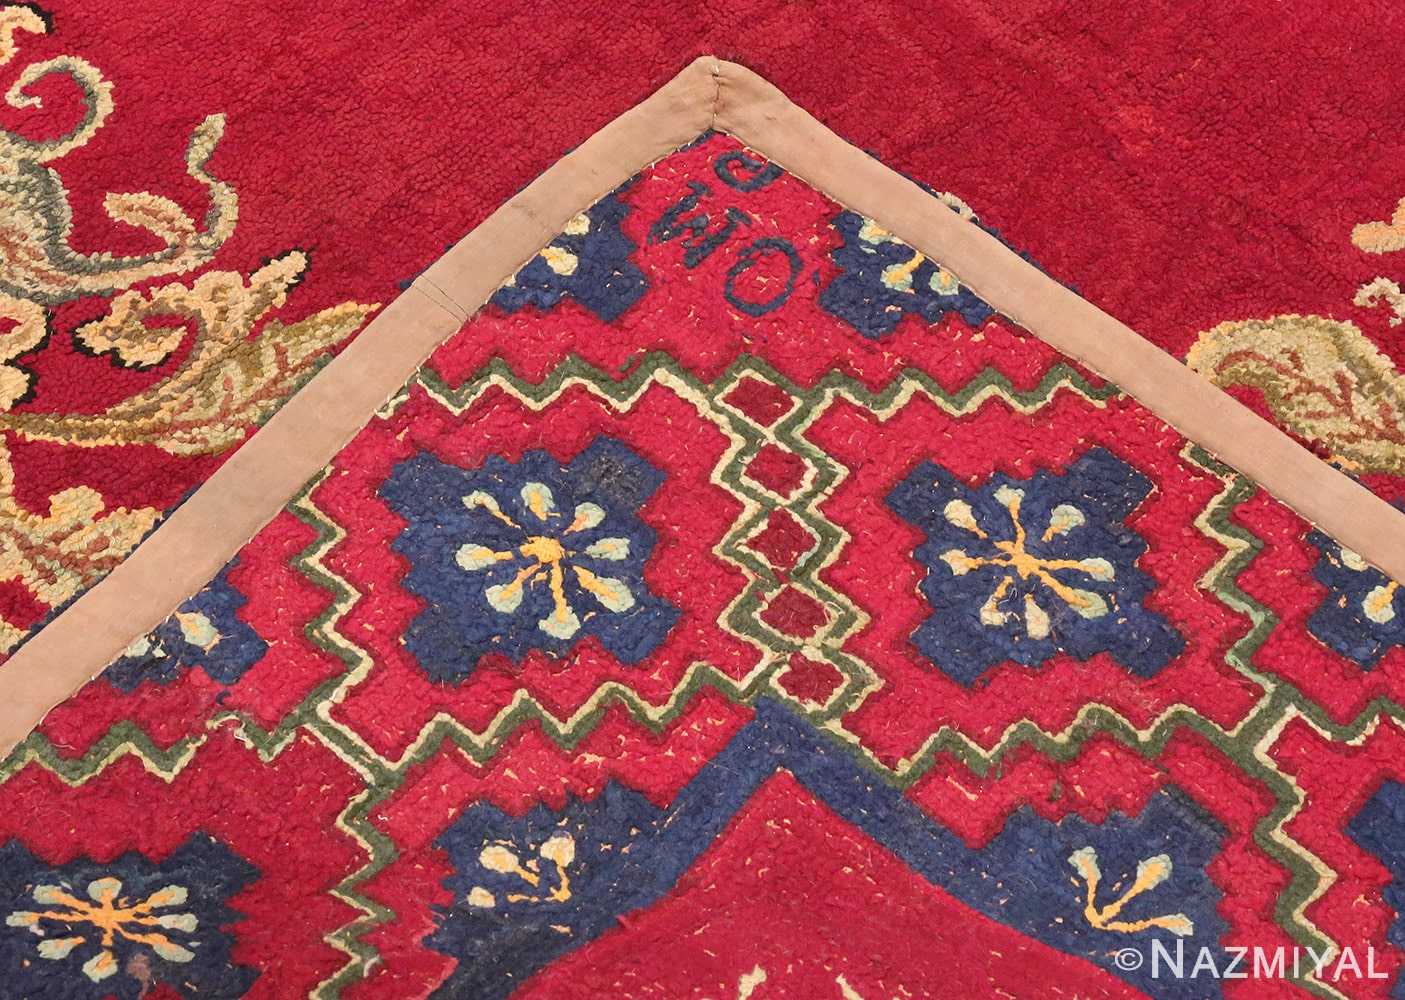 Picture of the Weave of red Medallion Design Antique American Hooked Rug #70059 from Nazmiyal Antique Rugs in NYC